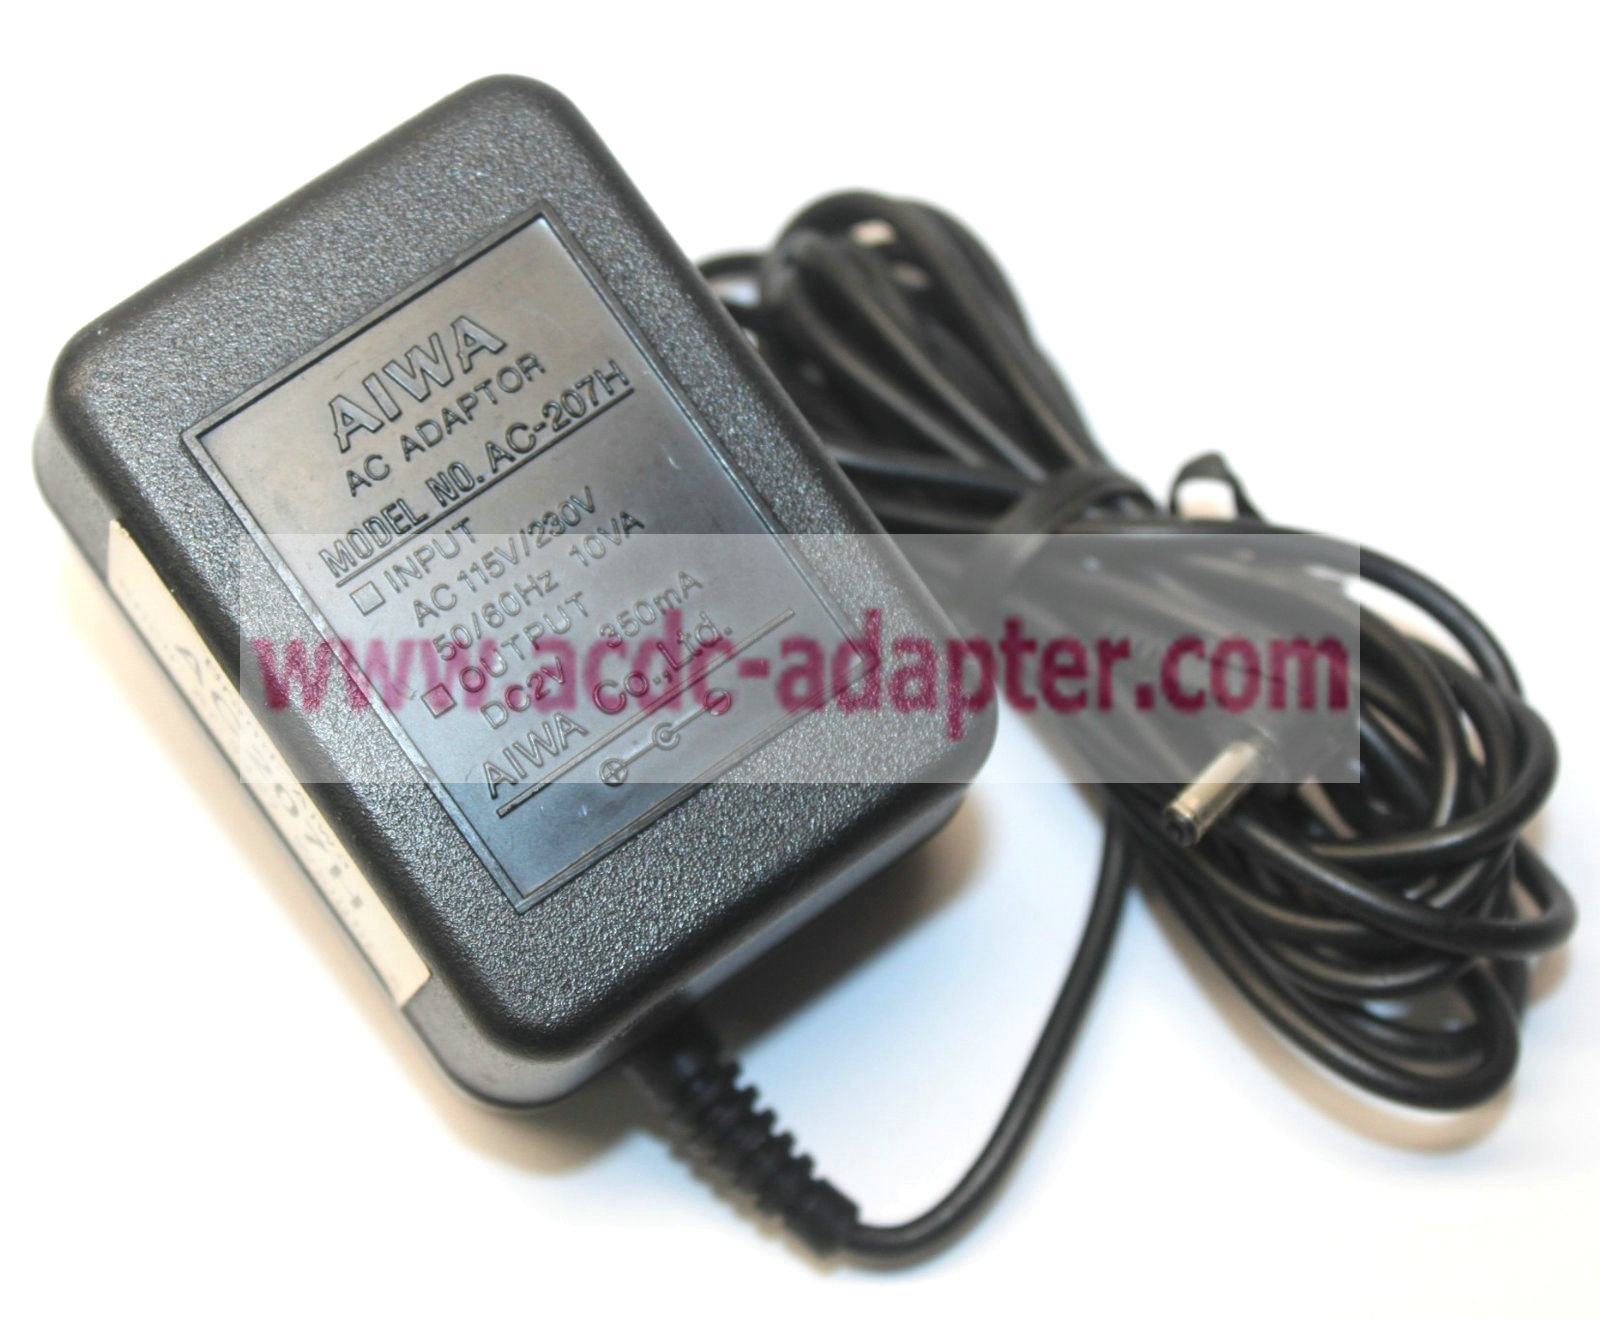 Brand new 12V 350 mA Aiwa AC-207H AC Adapter Power Supply Wall Plug-In Charger - Click Image to Close